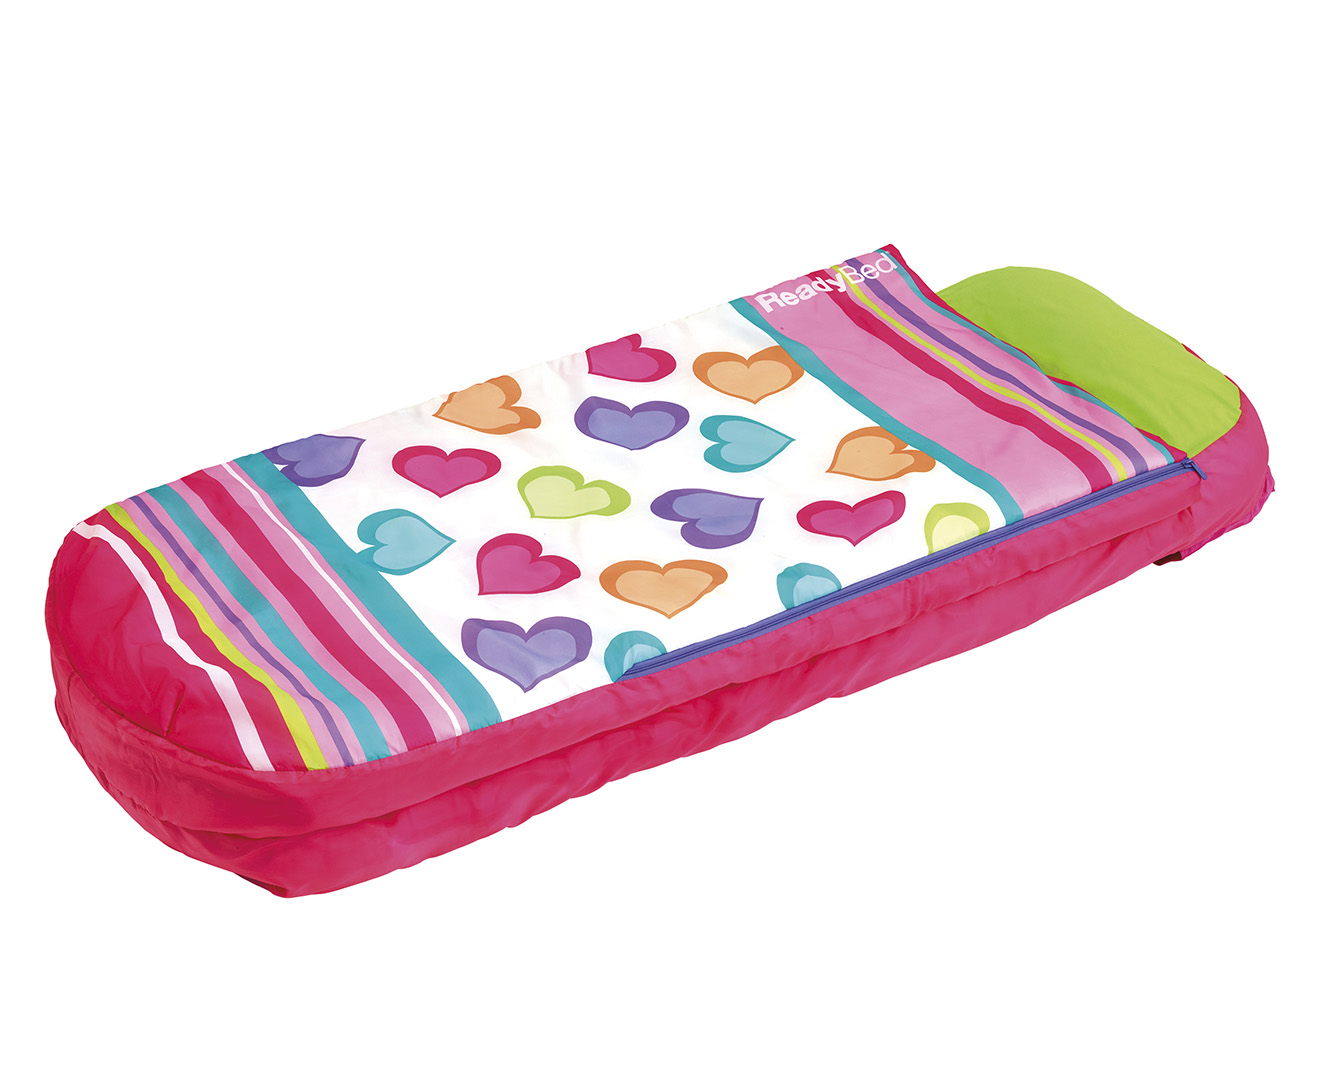 Kids Inflatable Ready Bed - Worlds Apart 